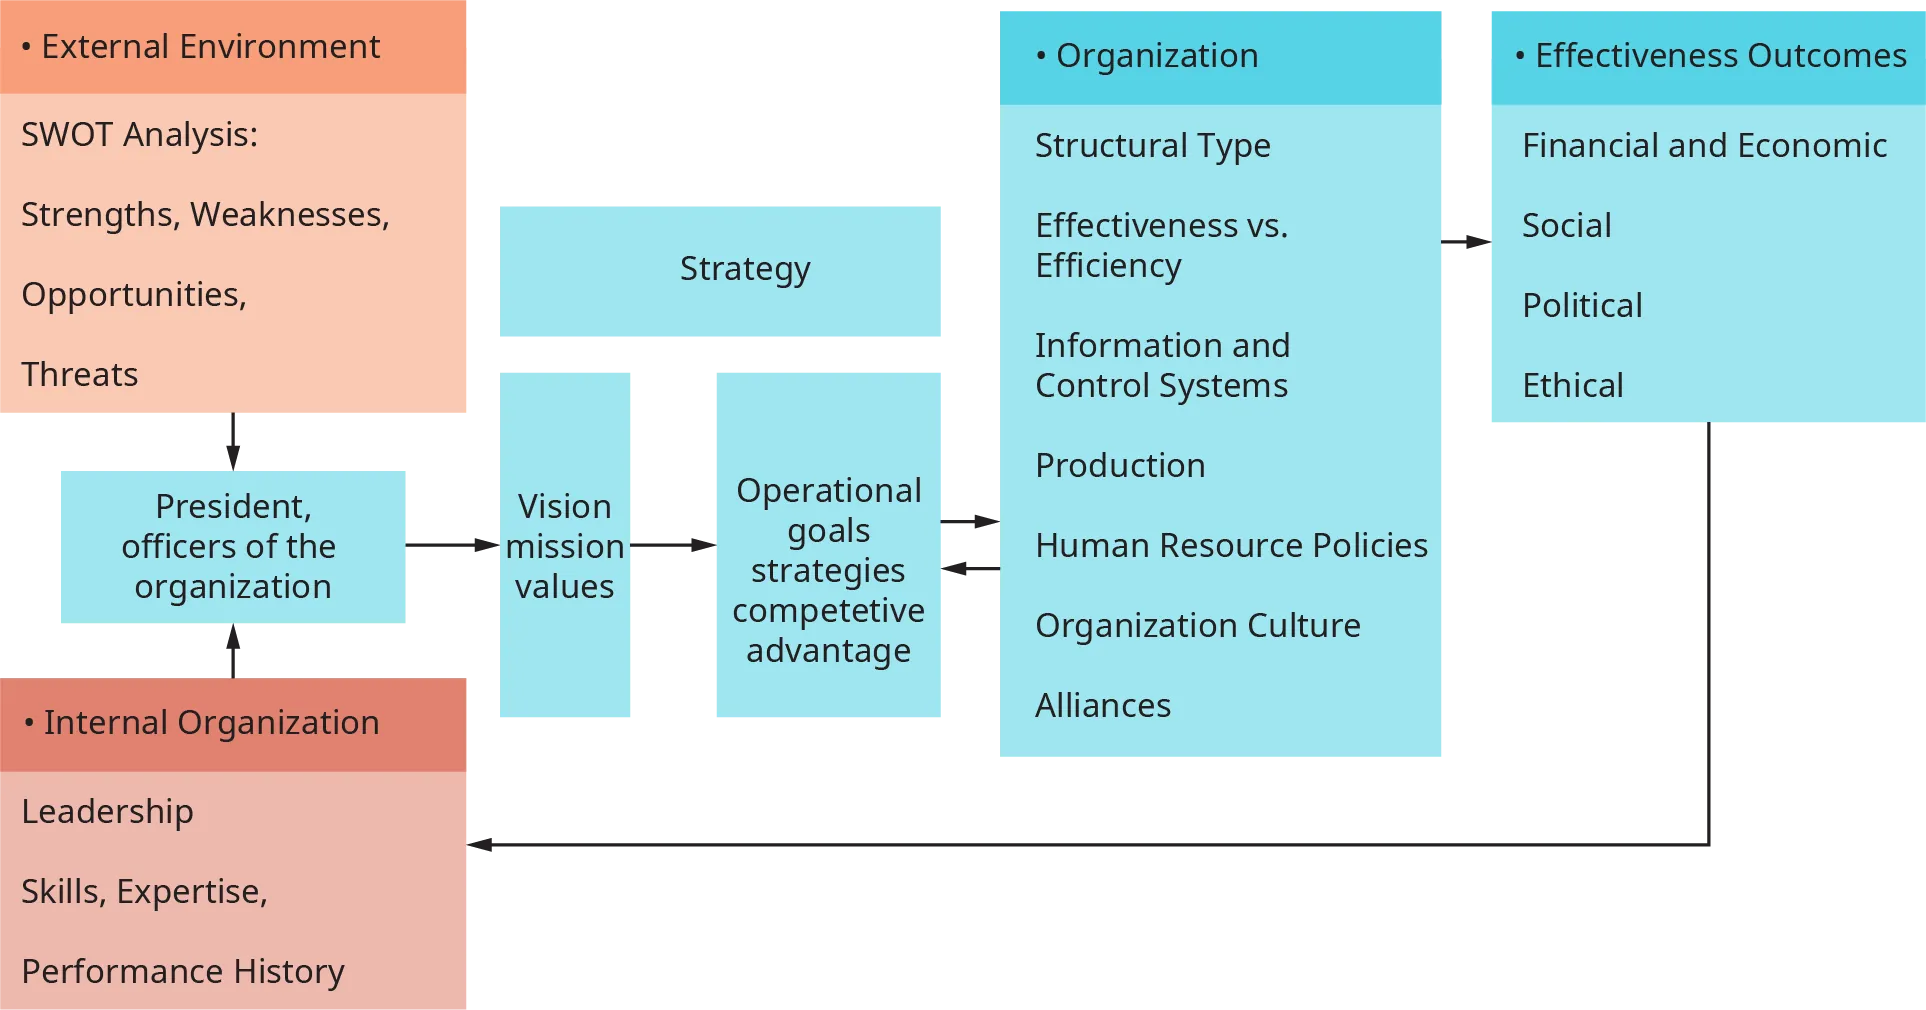 A diagram illustrates the integration of the internal environment and the external environment of an organization.